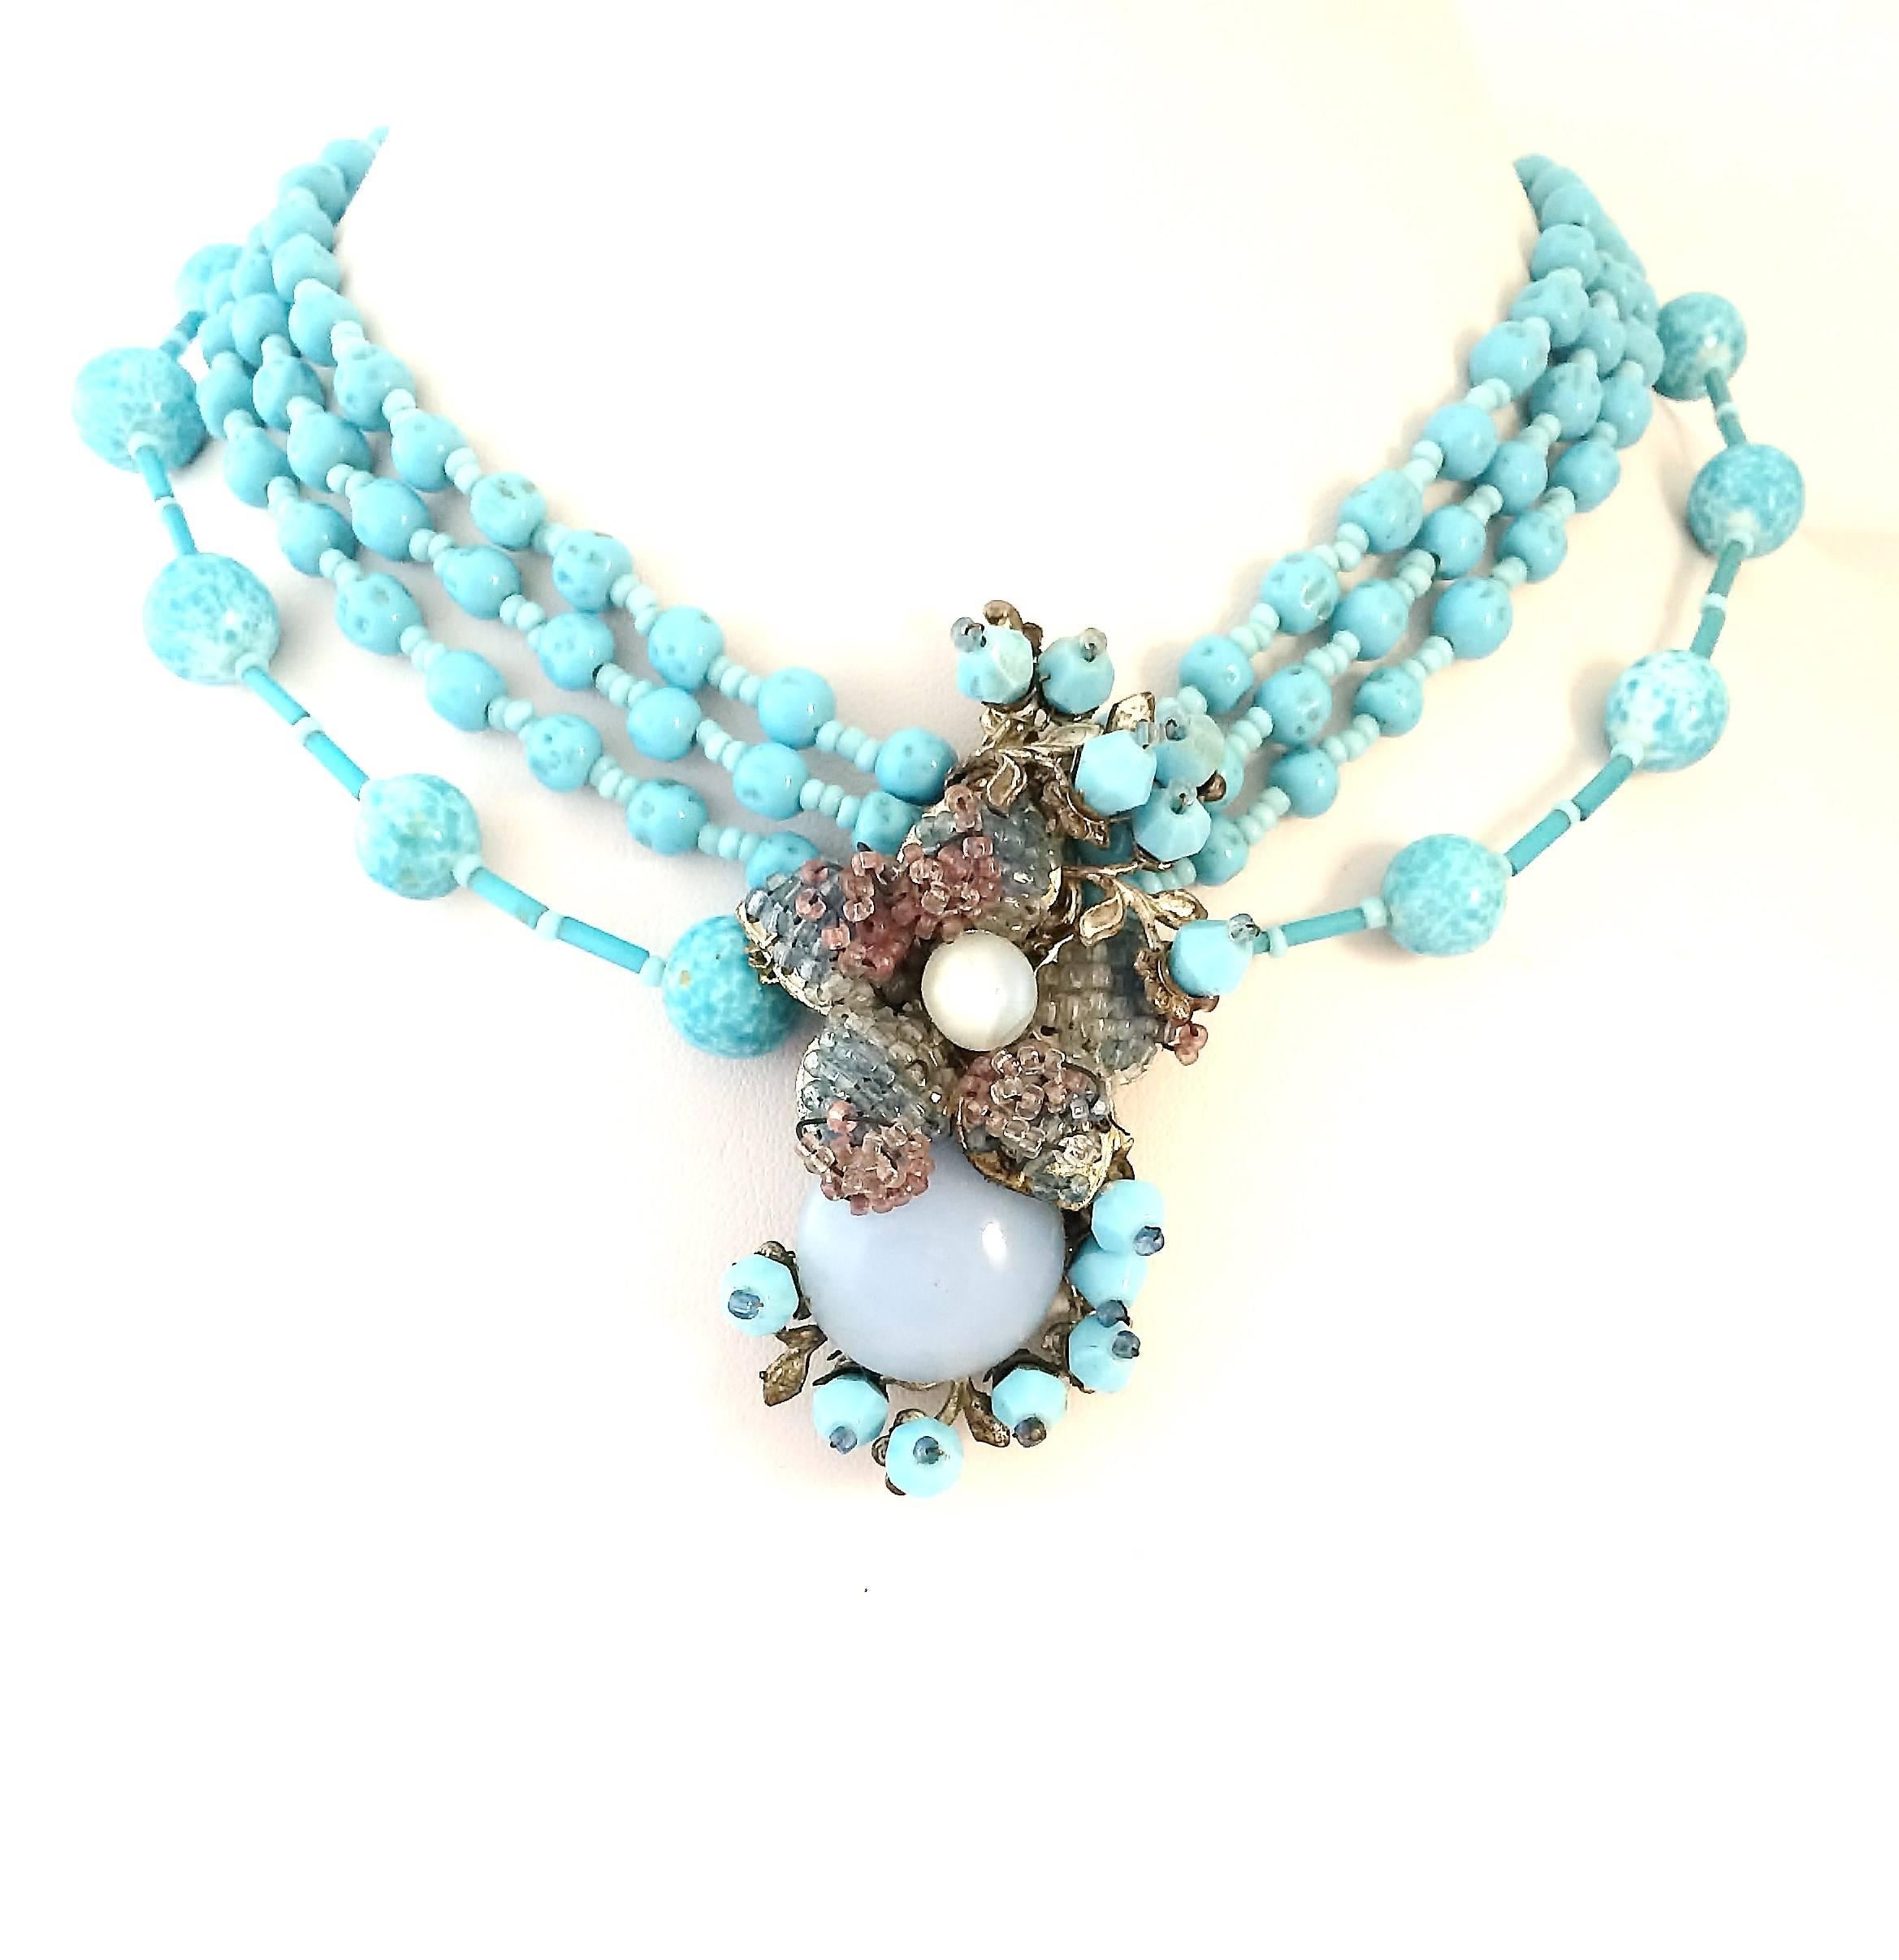 Beautiful delicate Miriam Haskell necklace, from the 1960s, made largely of marbled turquoise beads, with a centrepiece that is made of a larger and smaller moonstone cabuchon,  with a stylised flower in soft grey and amethyst glass microbeads, and